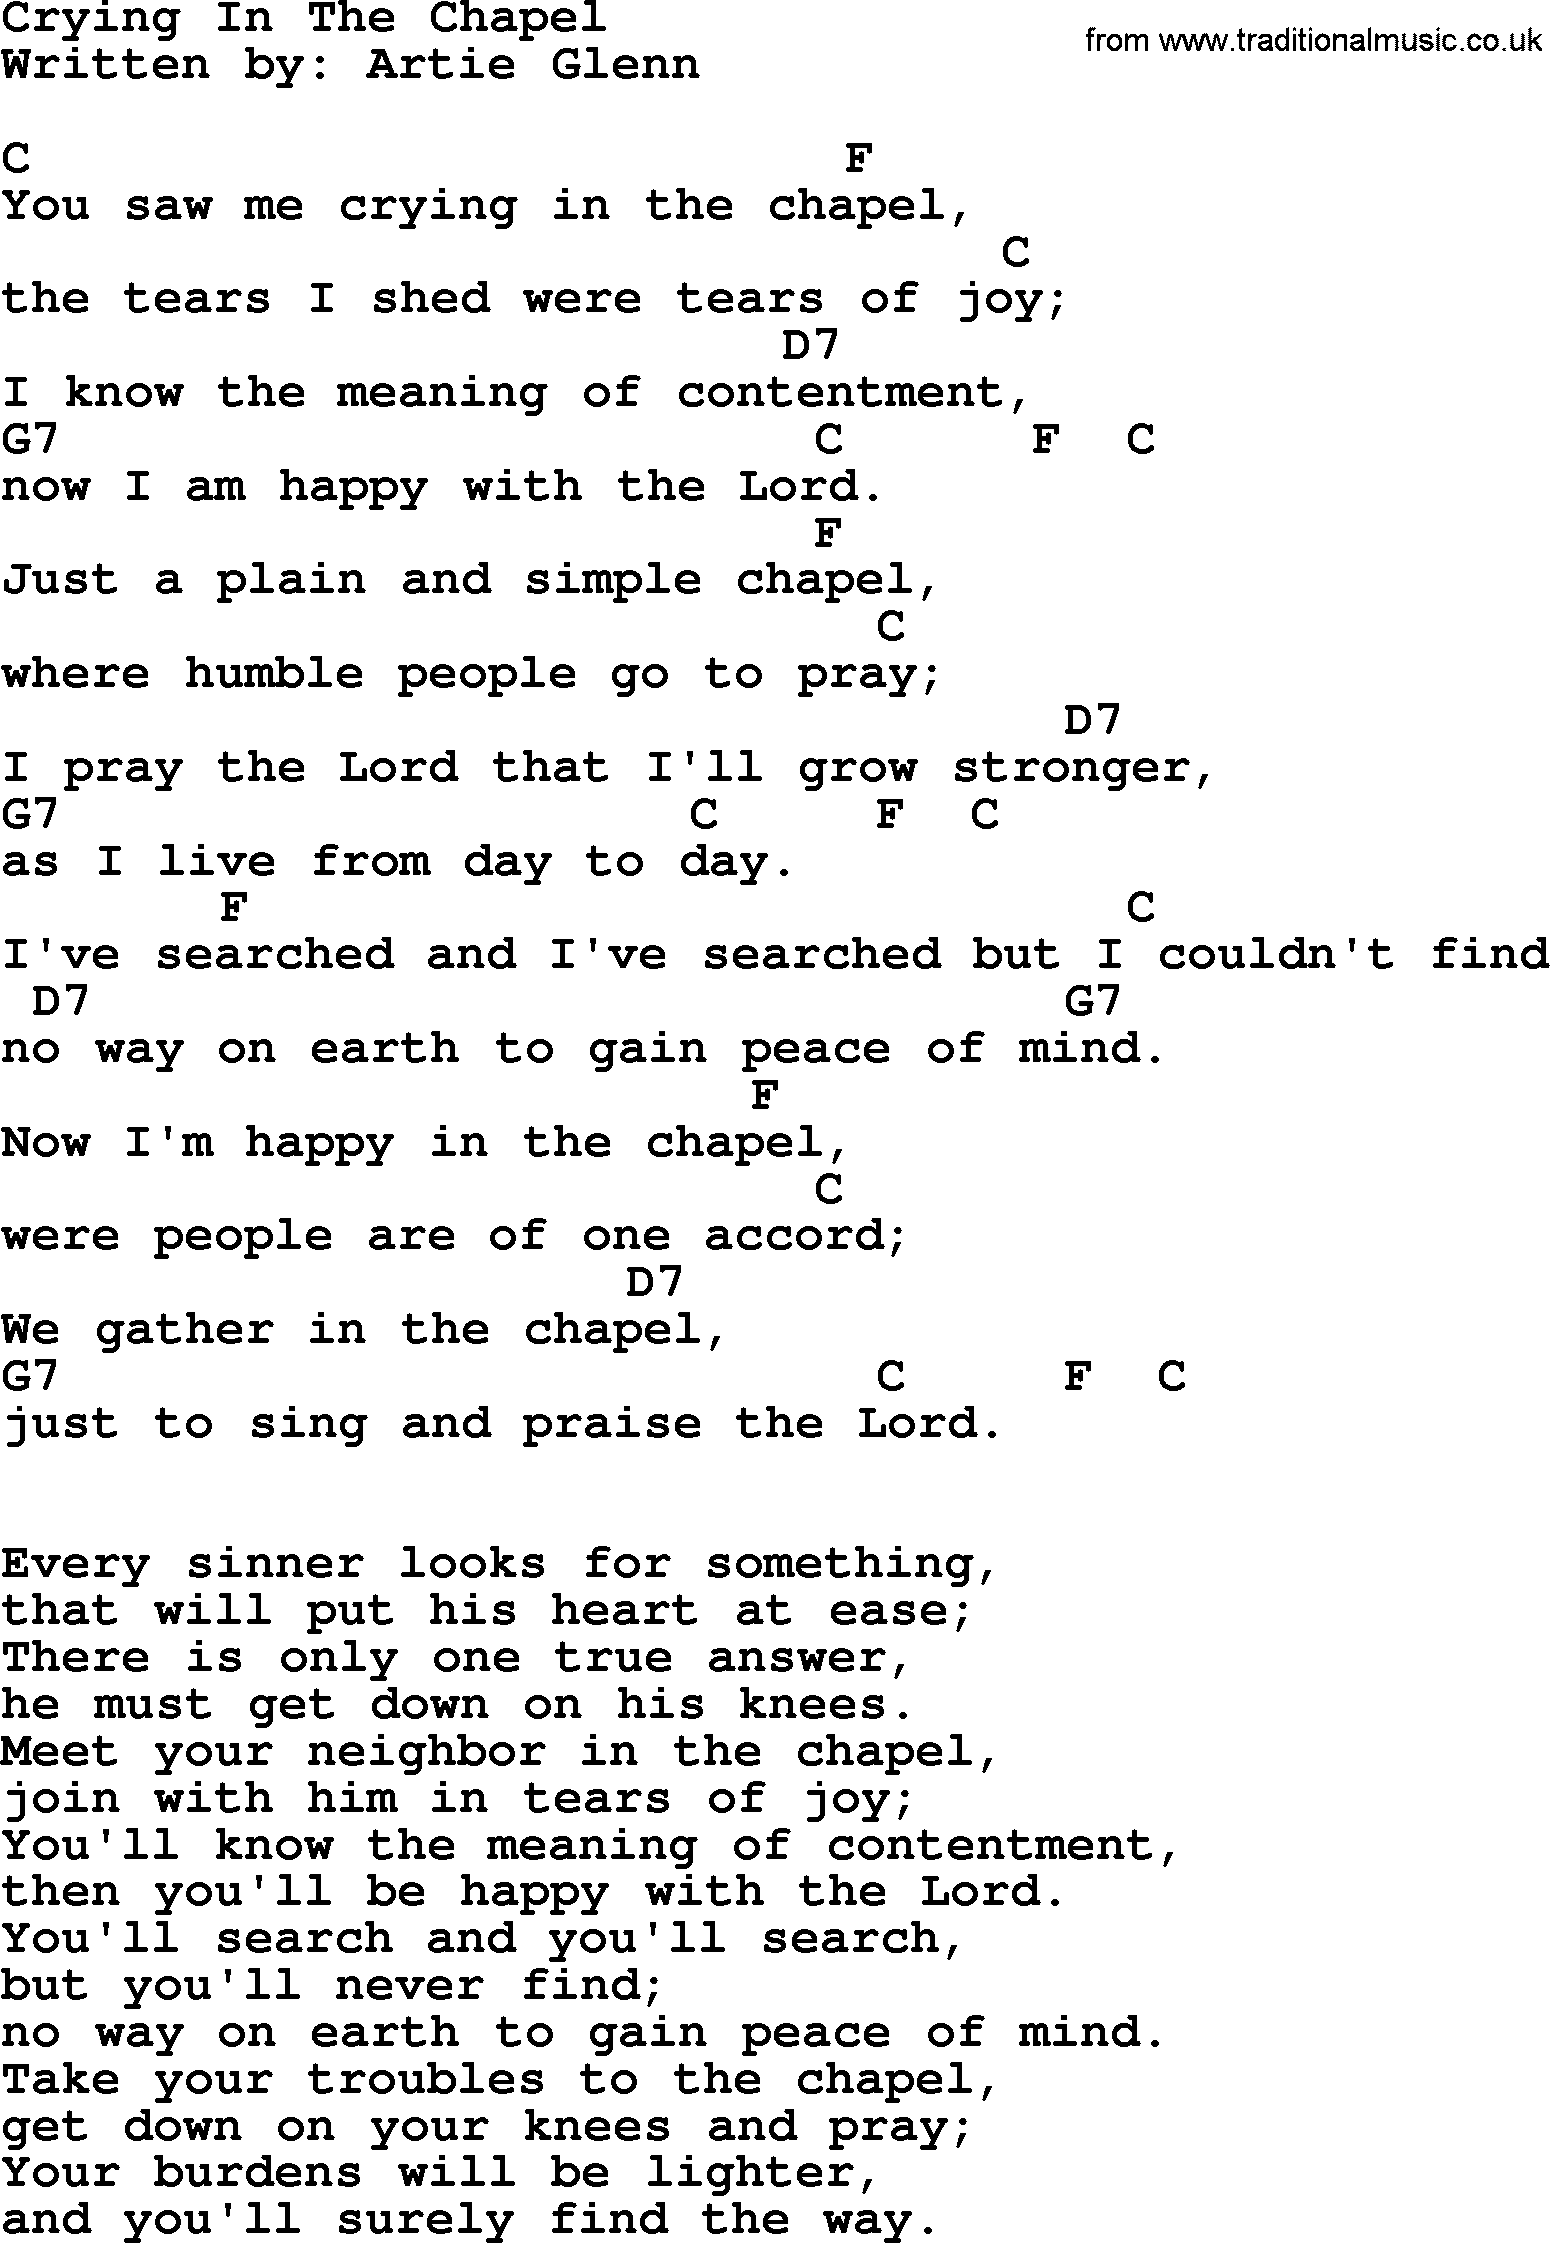 Elvis Presley song: Crying In The Chapel, lyrics and chords